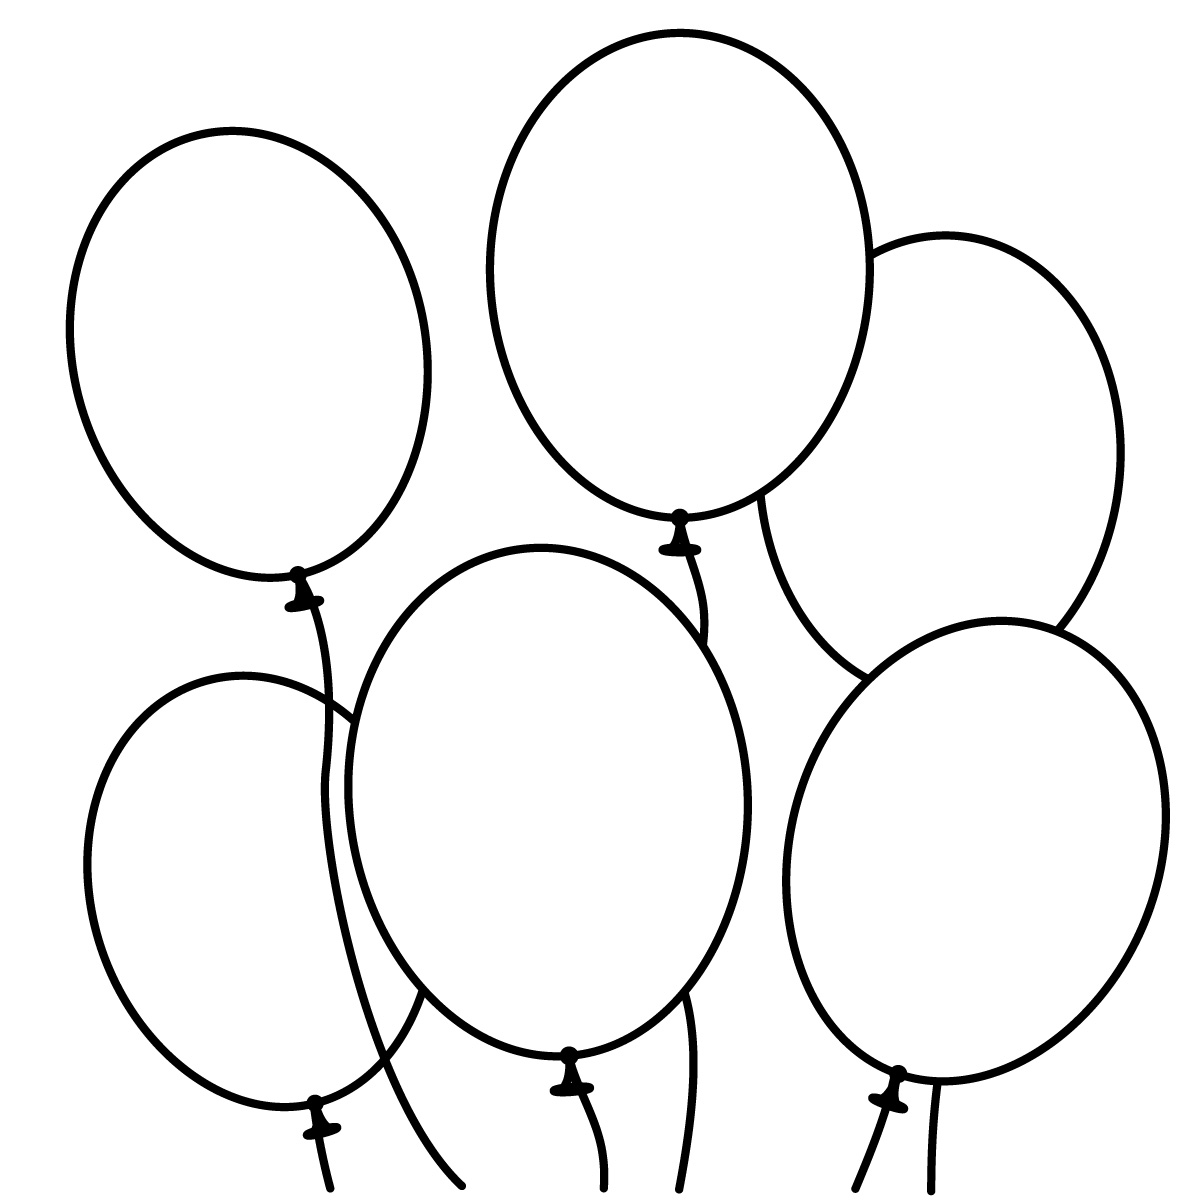 Snowman clipart, Clipart black and white and Balloons